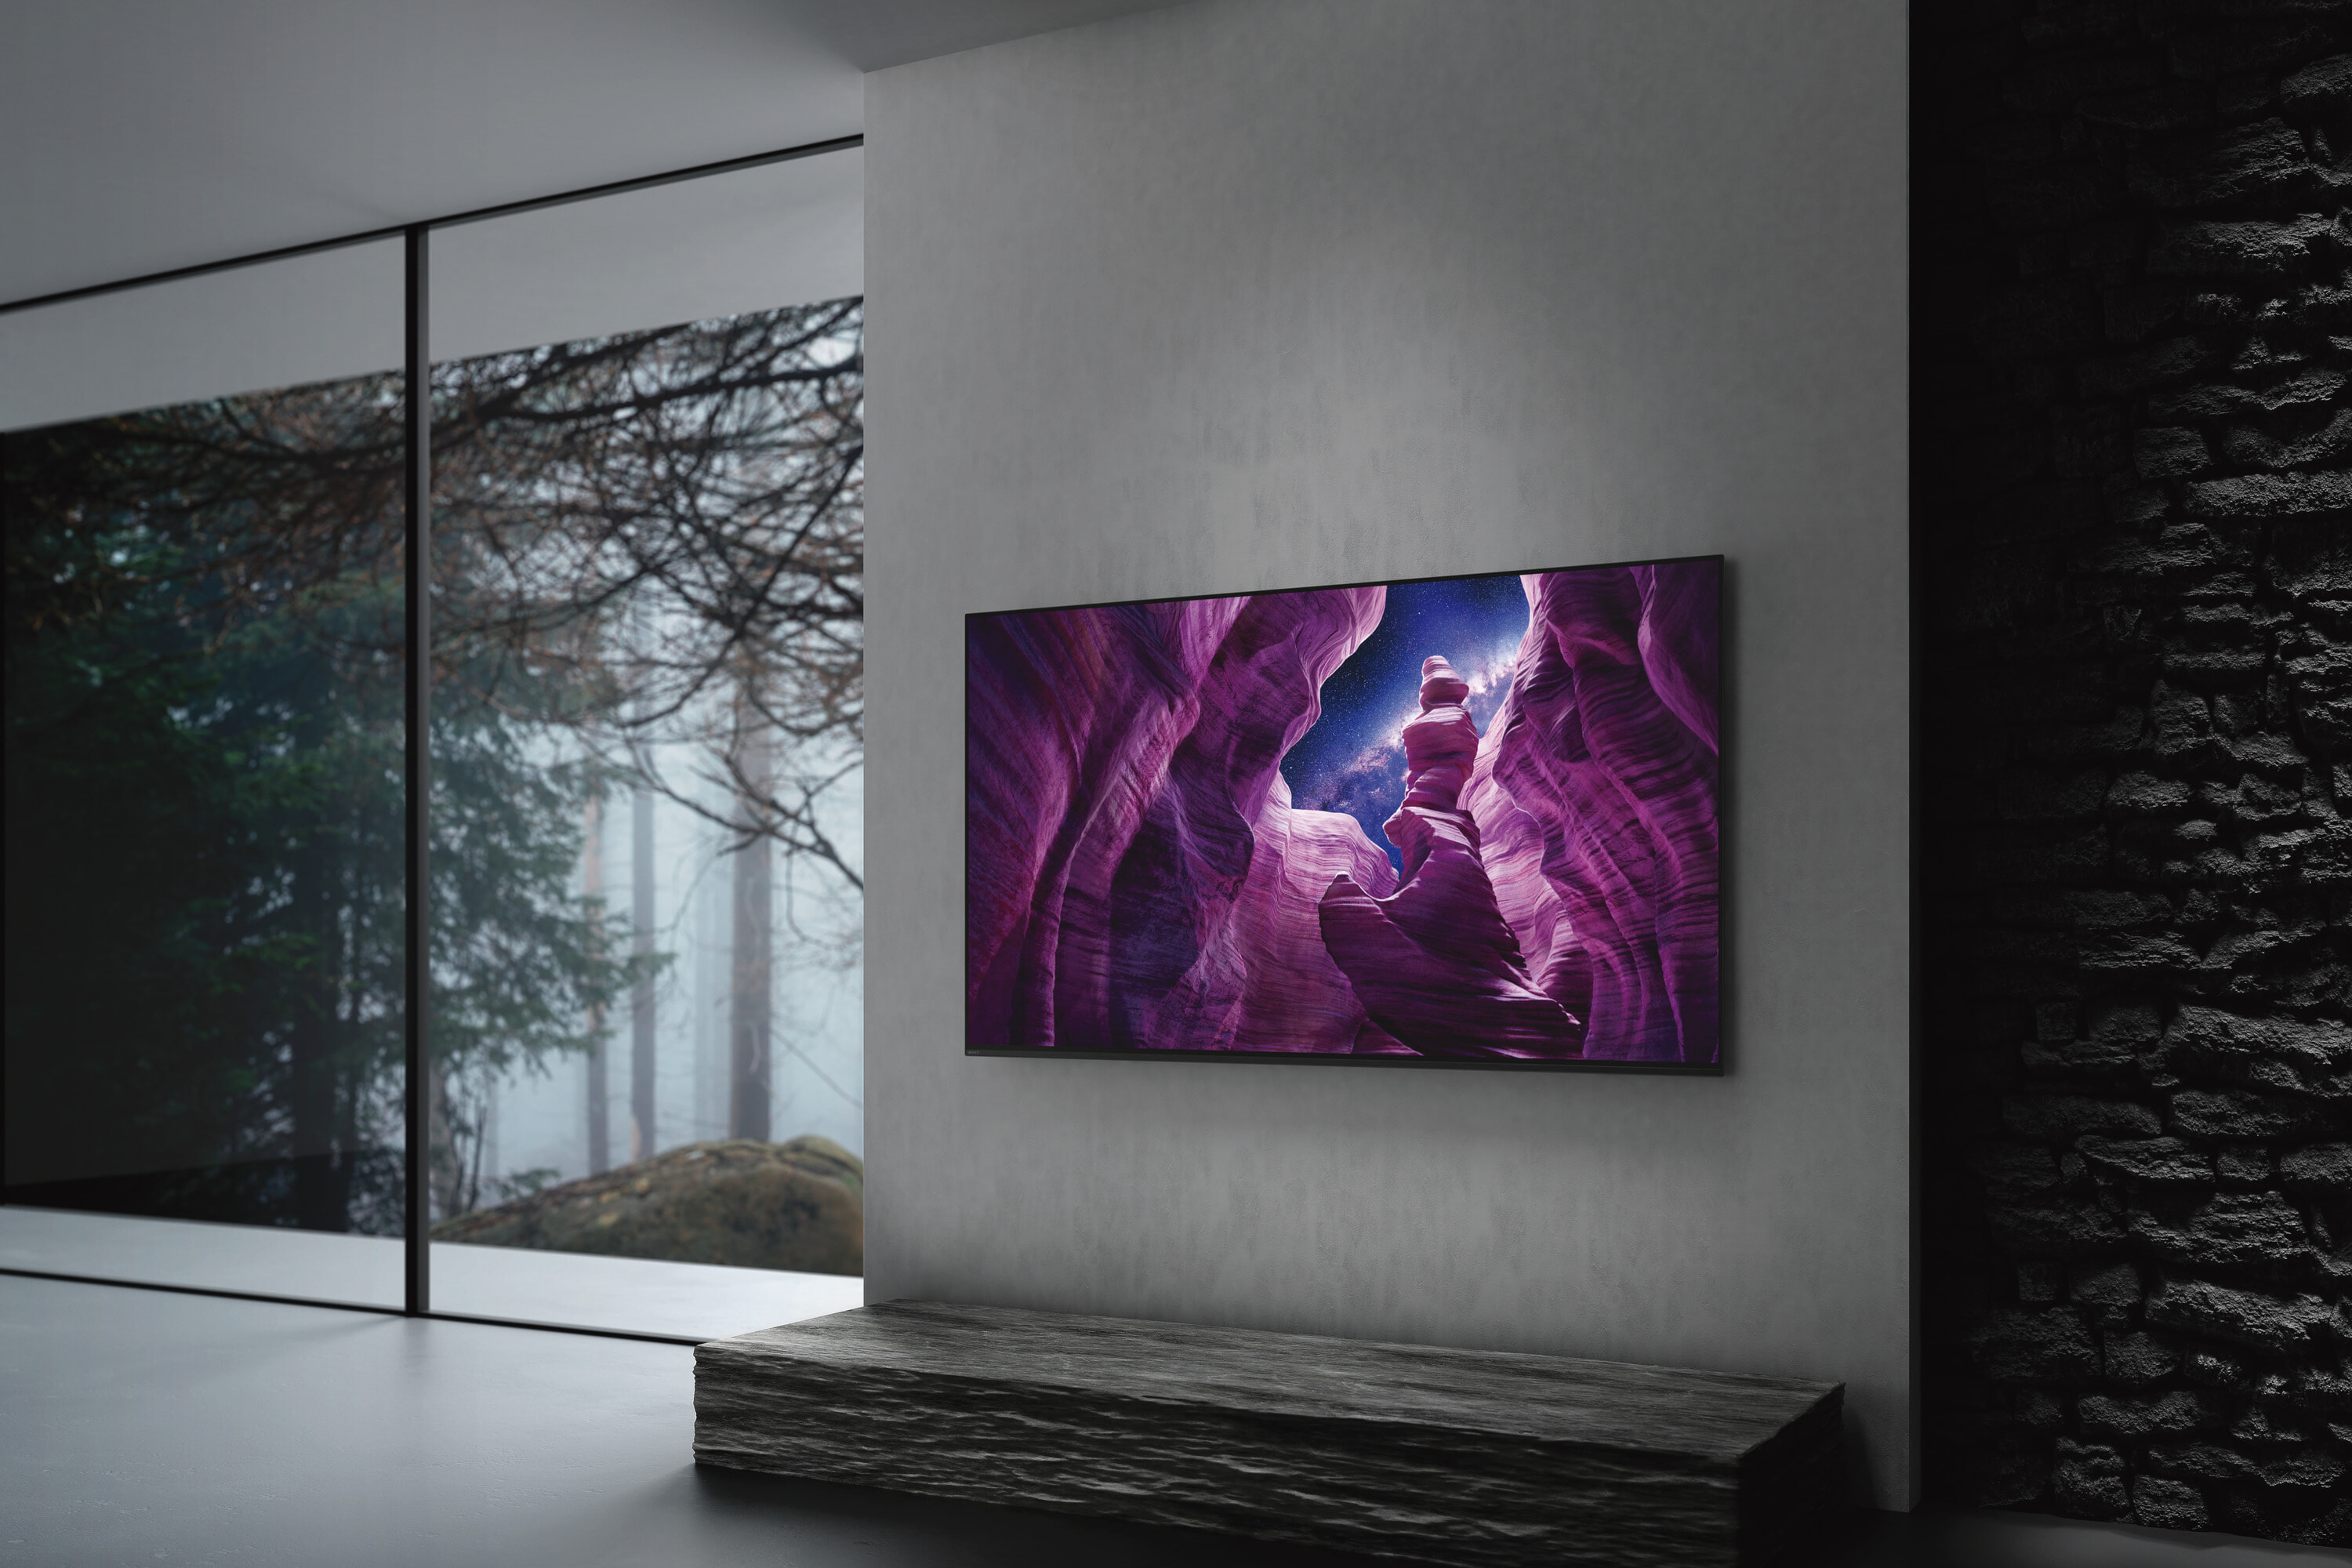 Stunning OLED TV setup as the centerpiece of a beautiful modern room.